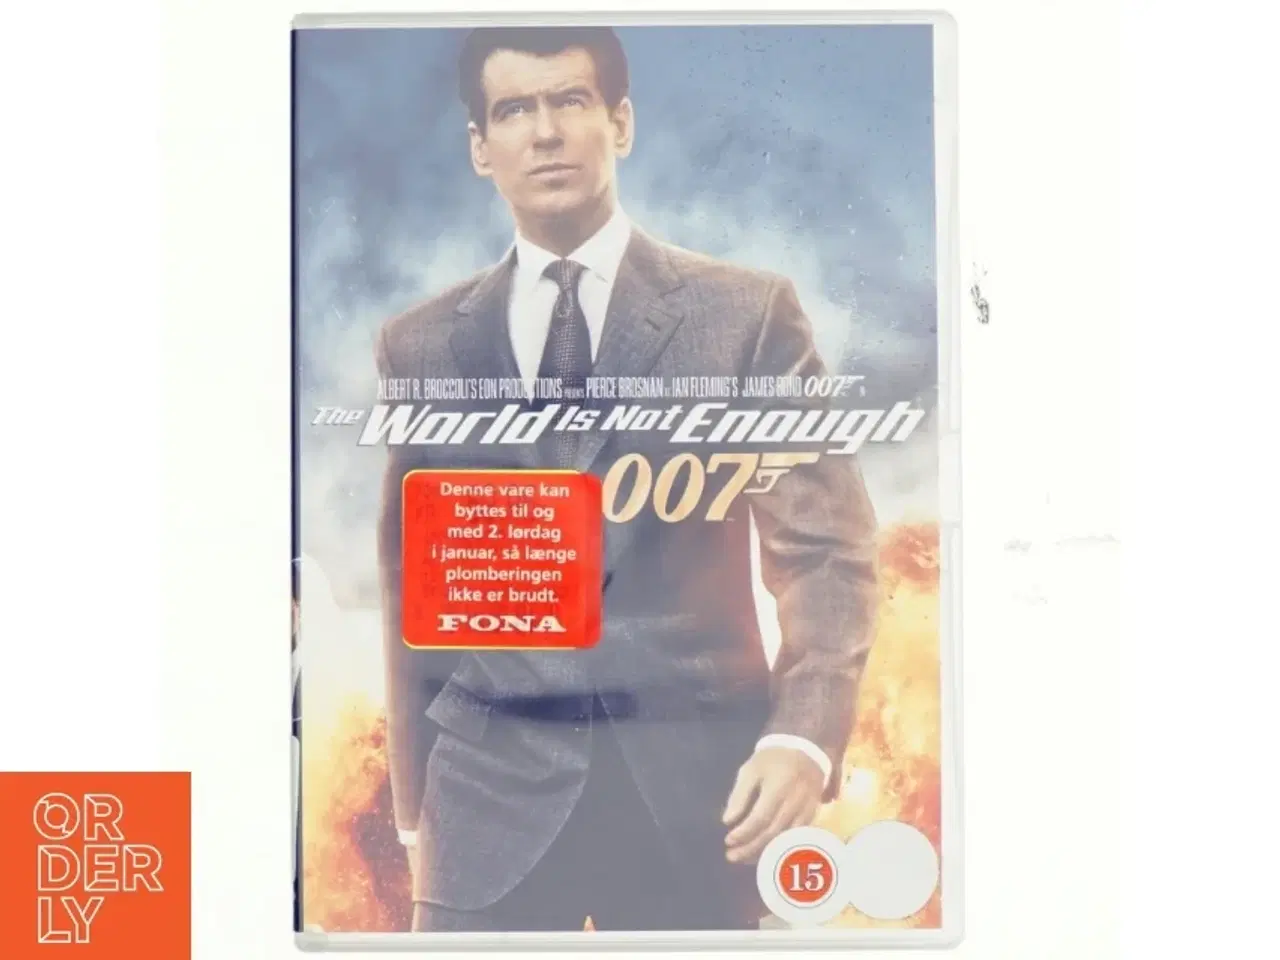 Billede 1 - The world is not enough, 007